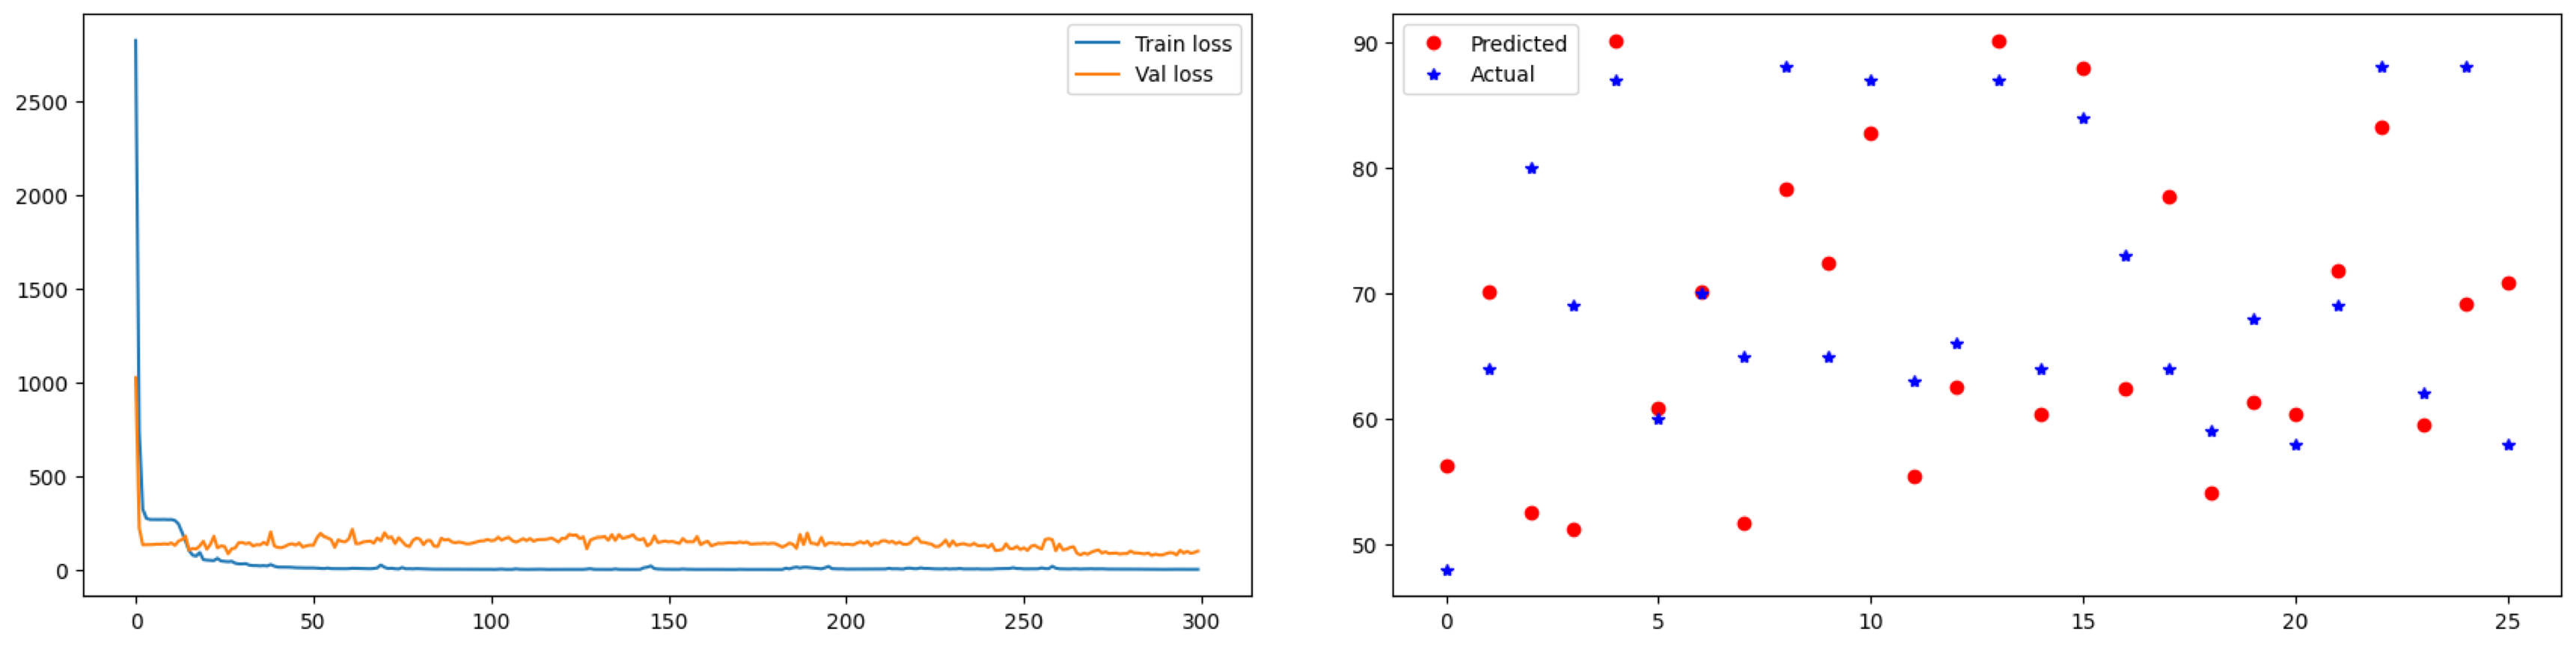 LSTM + Fully Connected Layer Model - Train, Validation Loss + Prediction Result